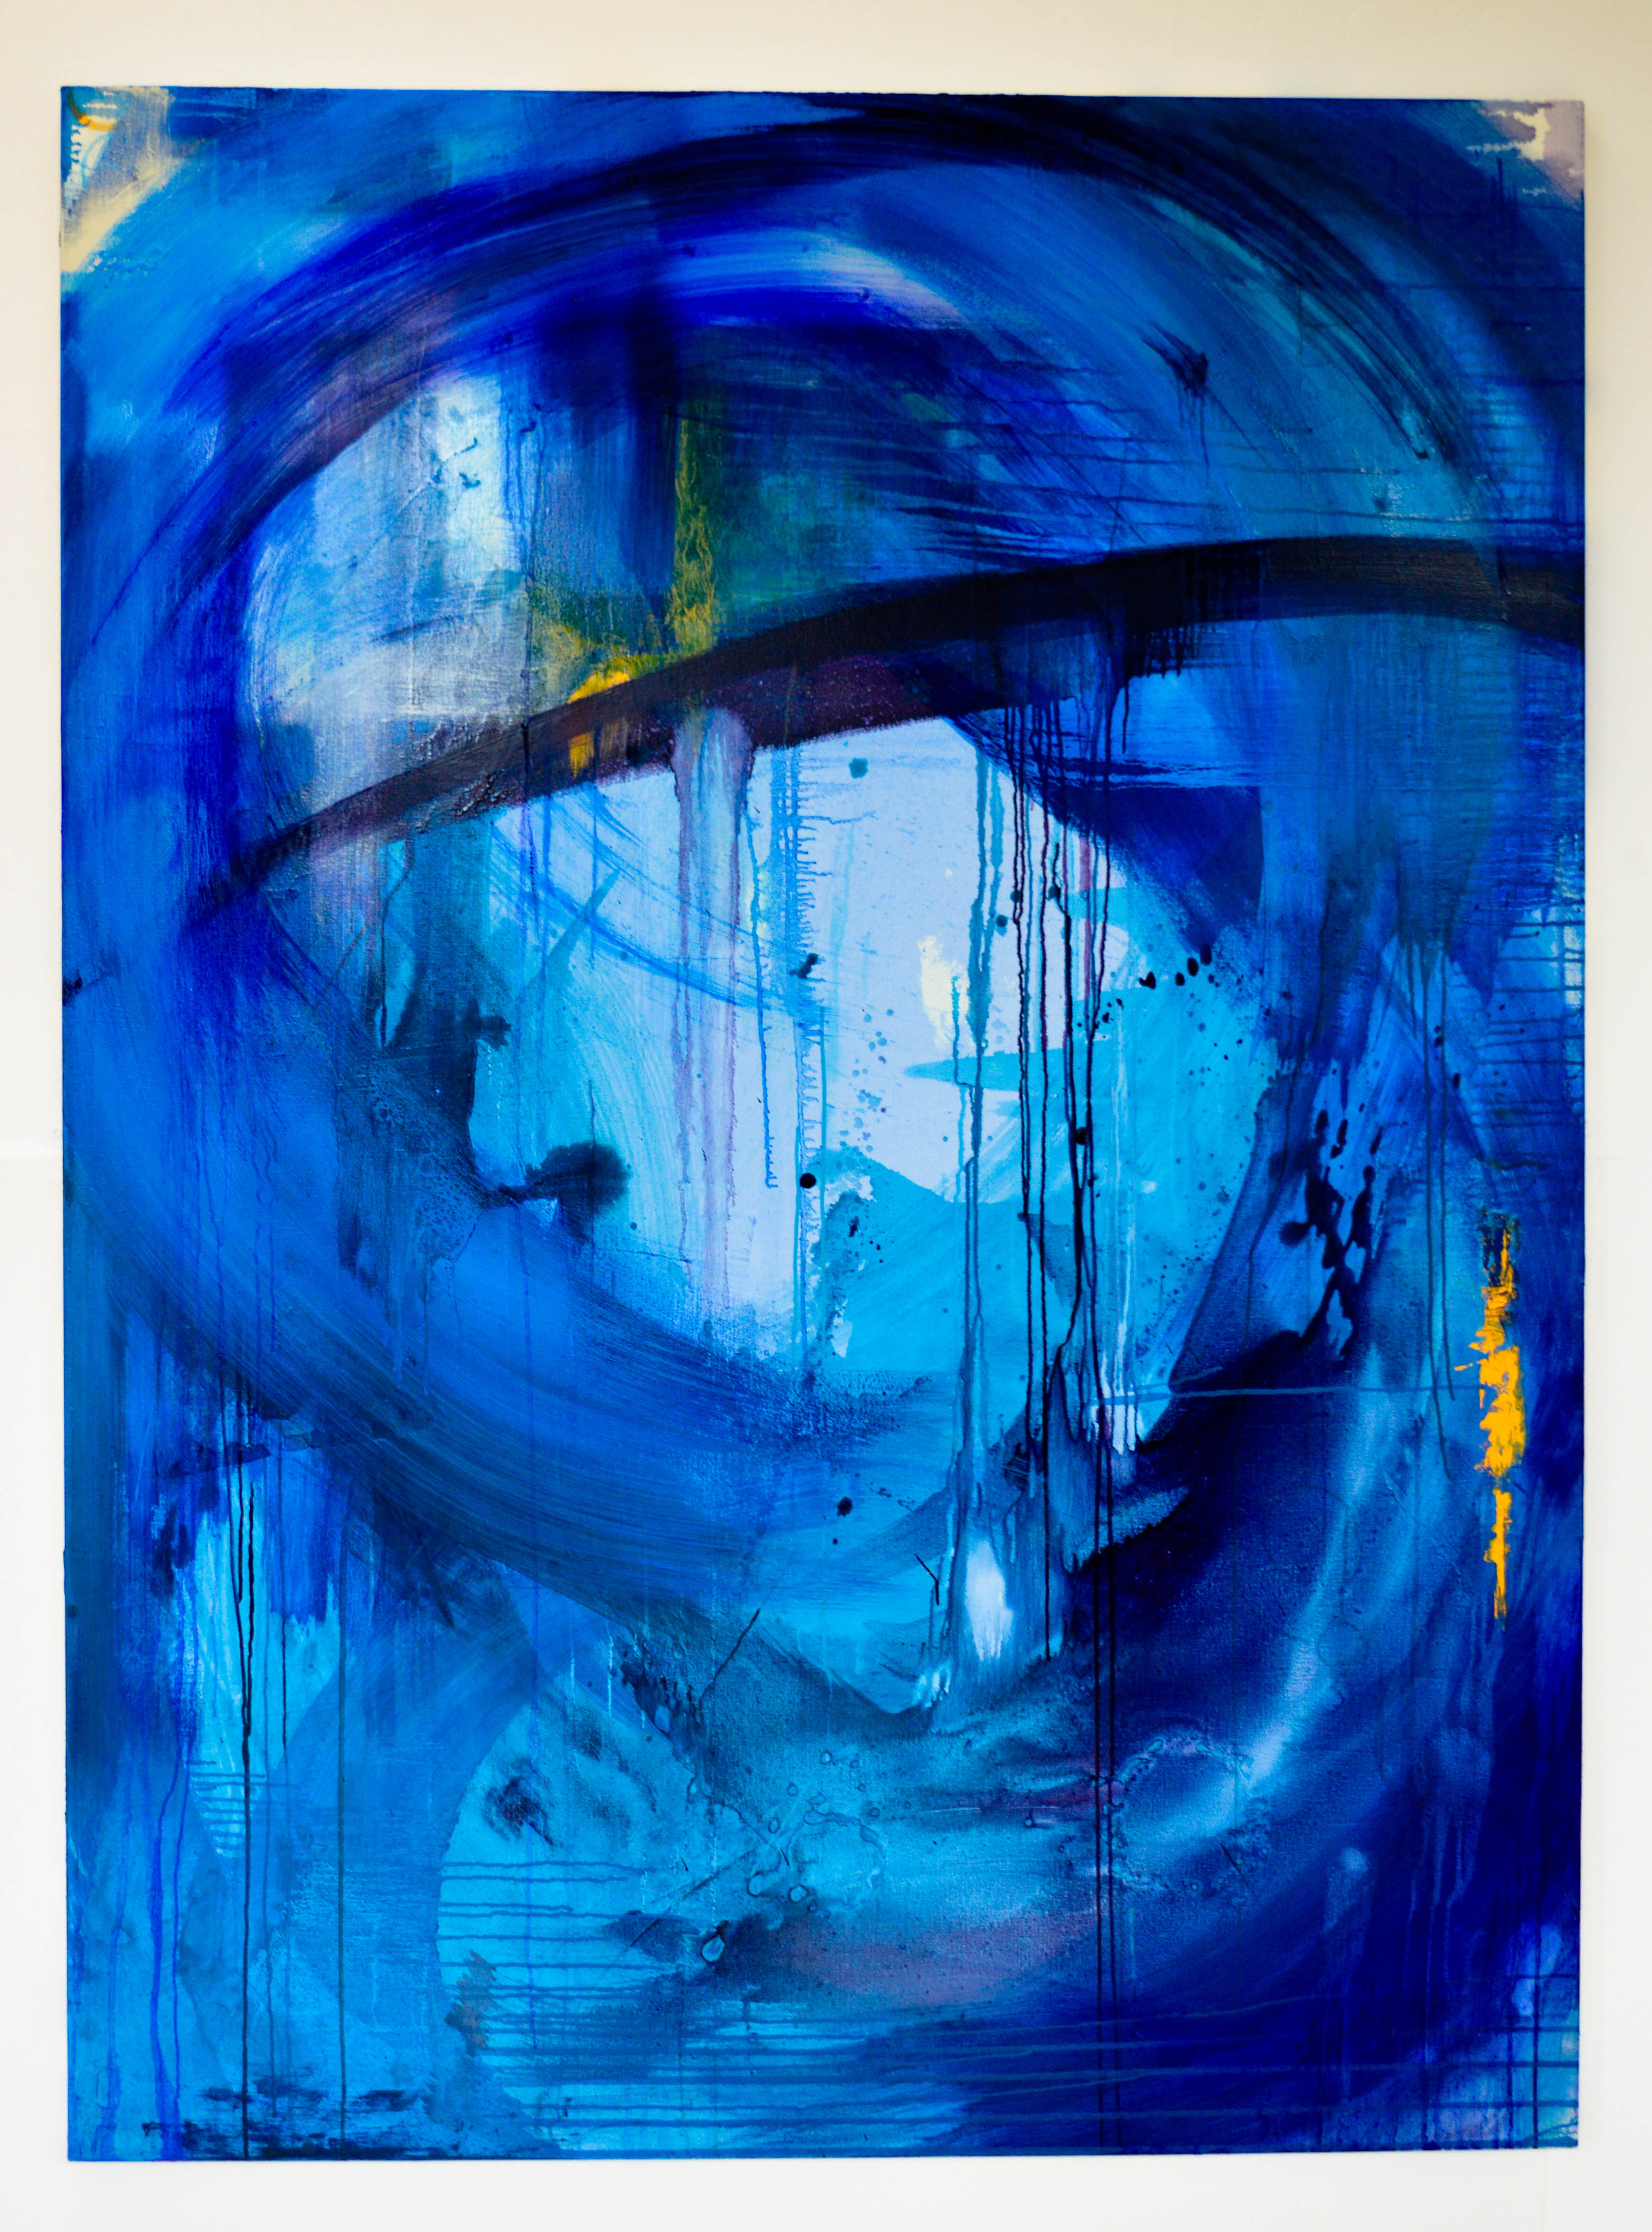 Blue Series 2.2. Oil on canvas. 182.9x134.5cm. For Sale.